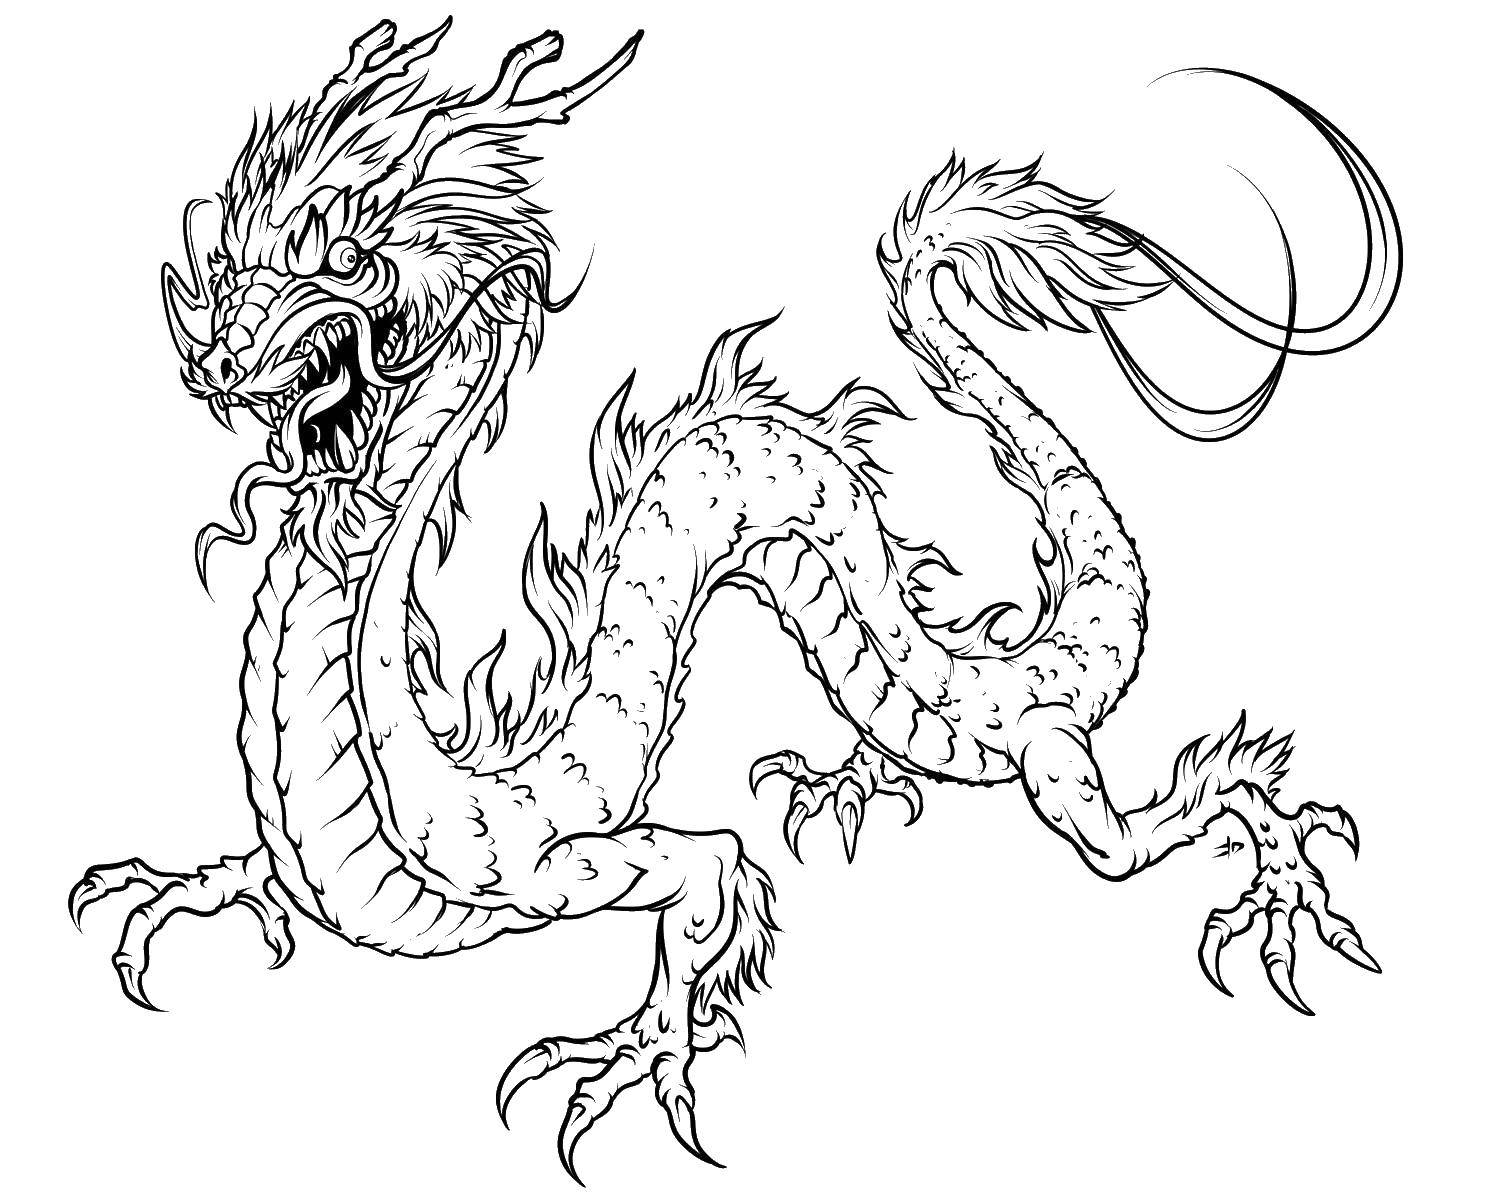 Coloring Chinese evil dragon. Category Dragons. Tags:  Dragons.